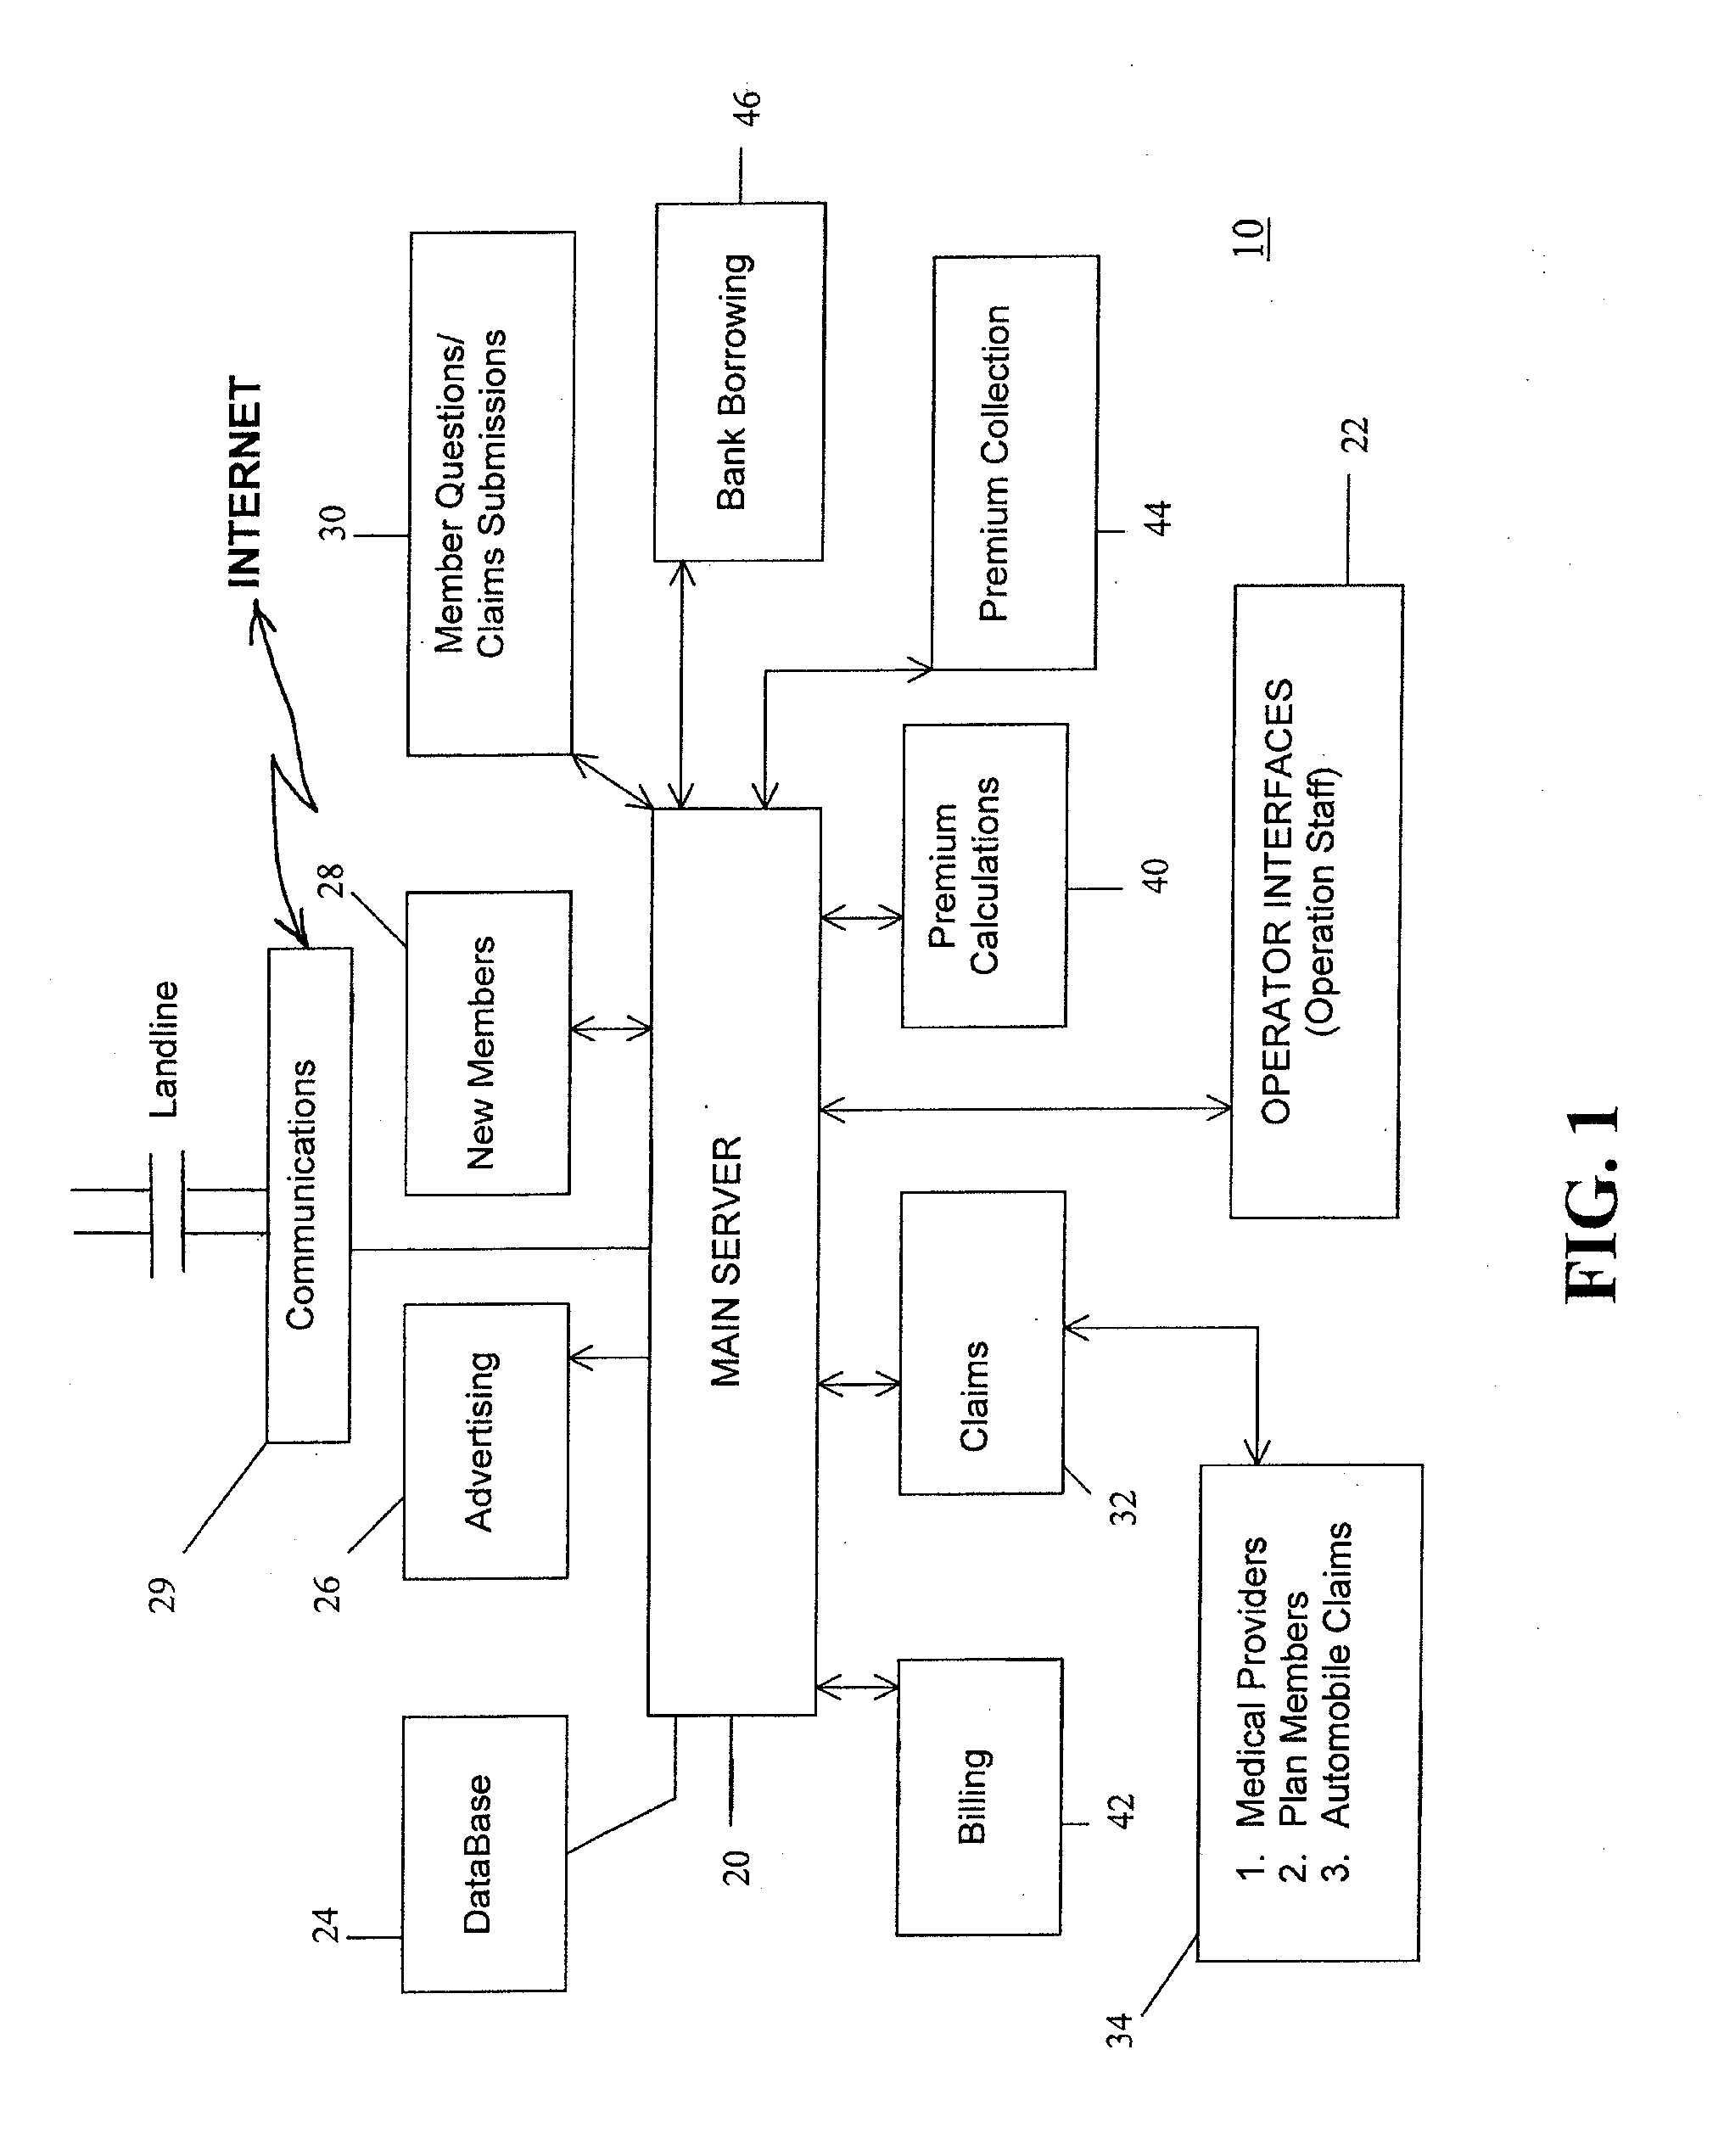 System and method for active and group sharing of medical and casualty expenses